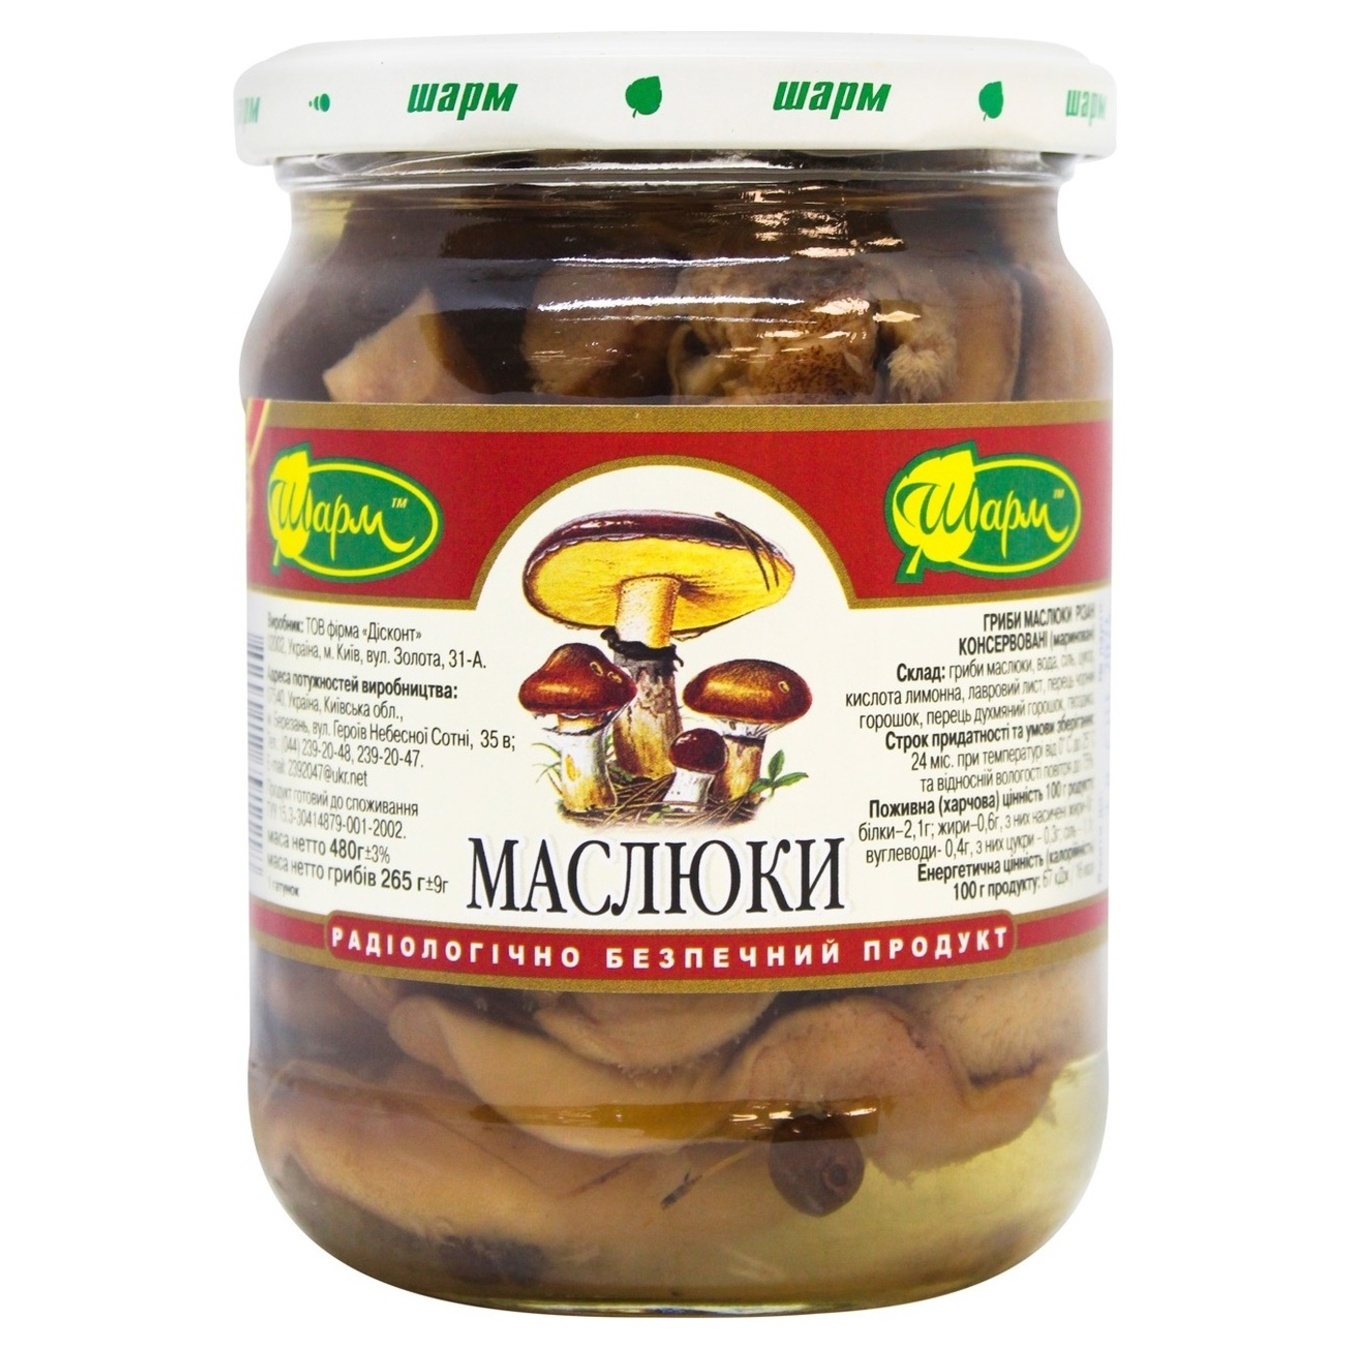 Sharm buttercup mushrooms, sliced, canned, marinated, 480g